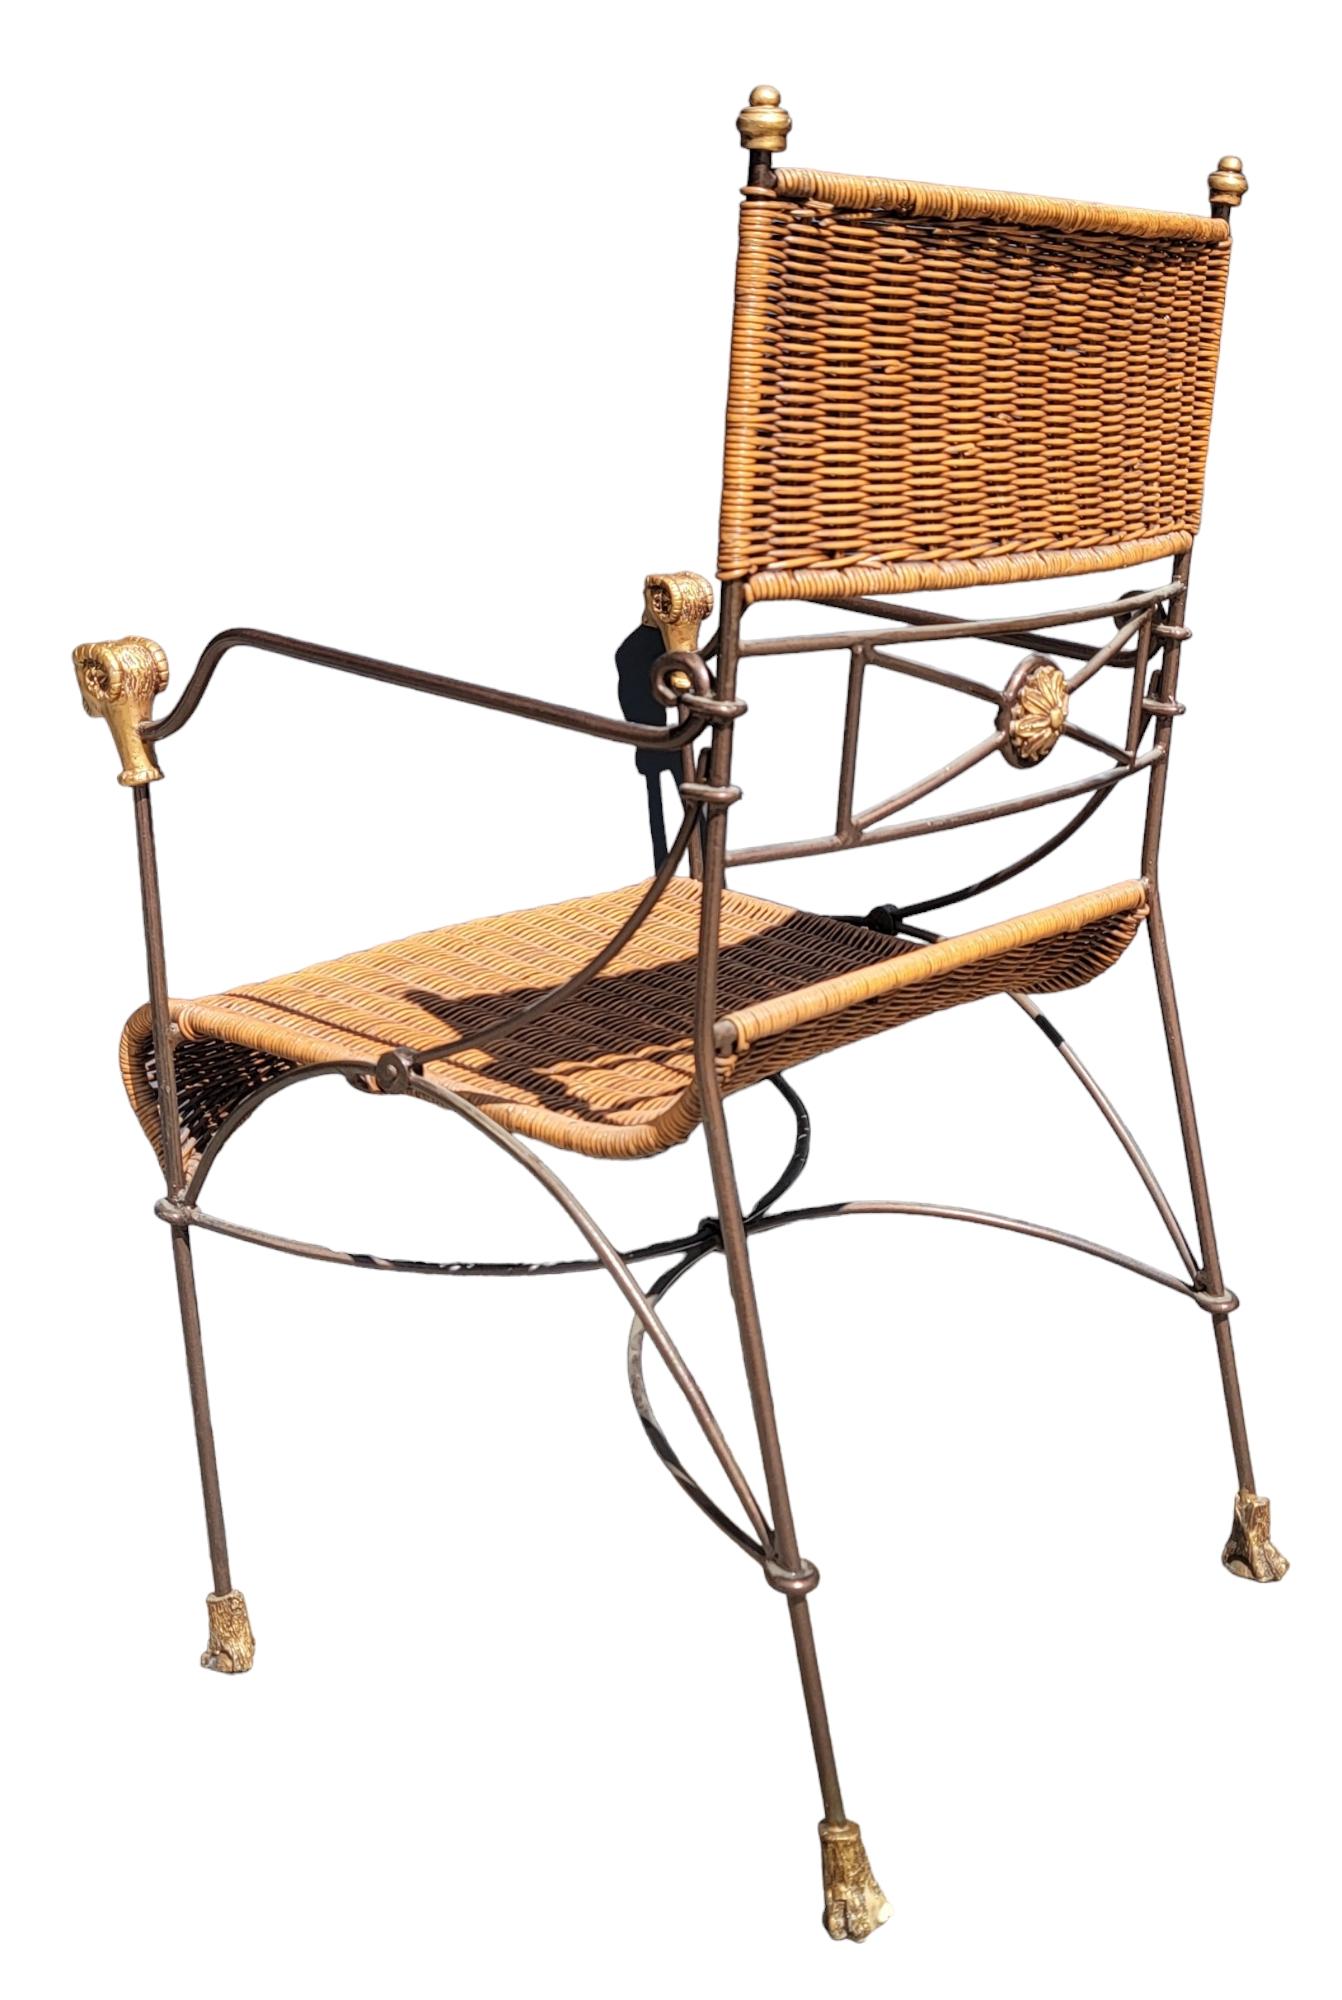 Set of Three Iron And Wicker Settee And Chair By Giacometti  For Sale 1